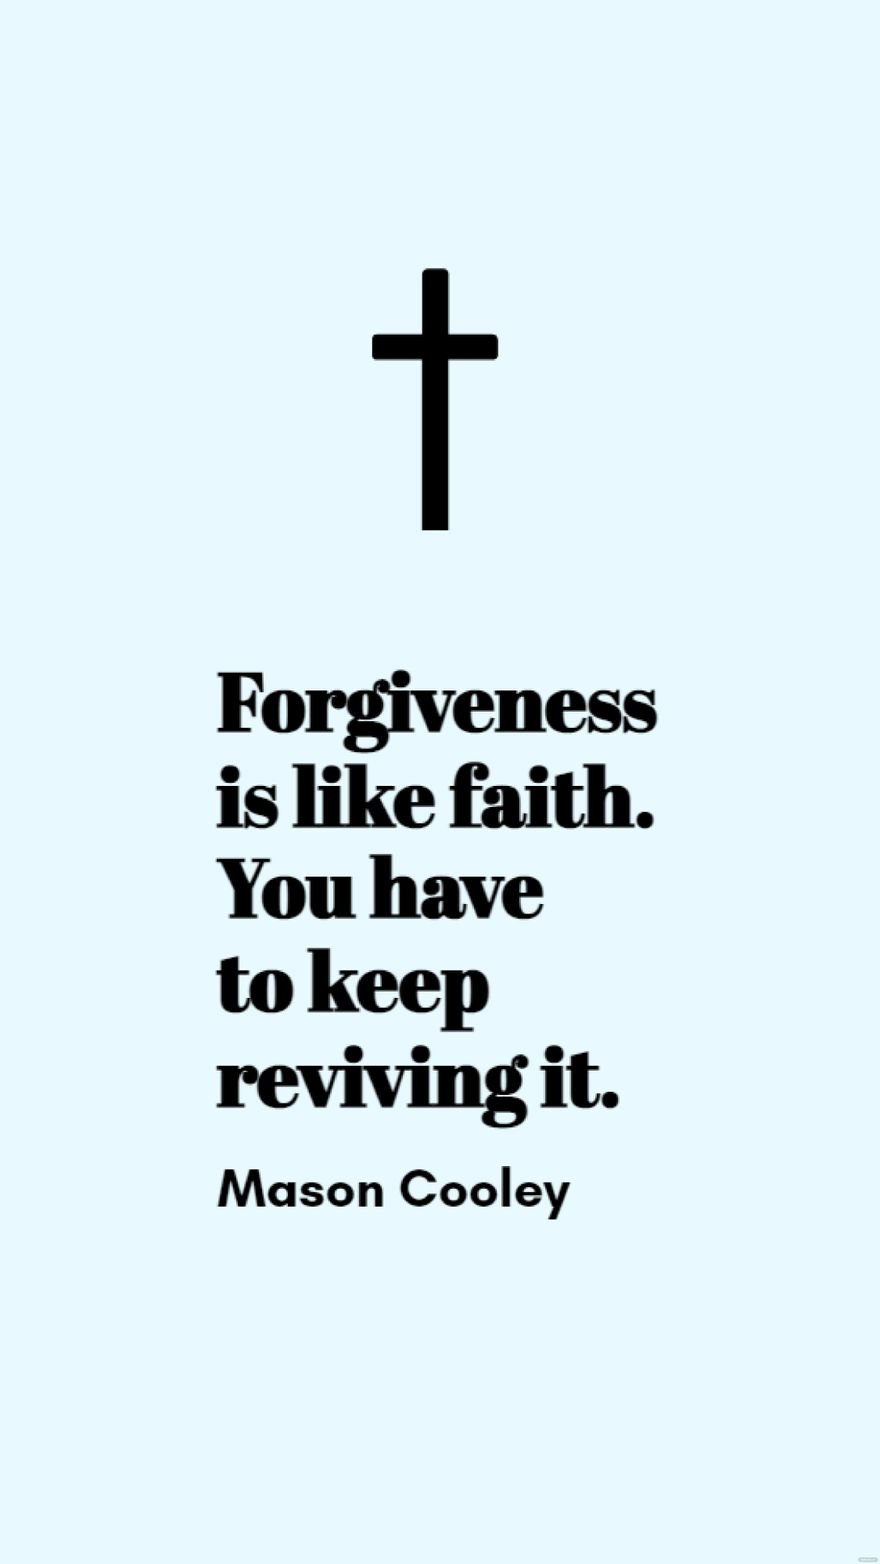 Free Mason Cooley - Forgiveness is like faith. You have to keep reviving it. in JPG